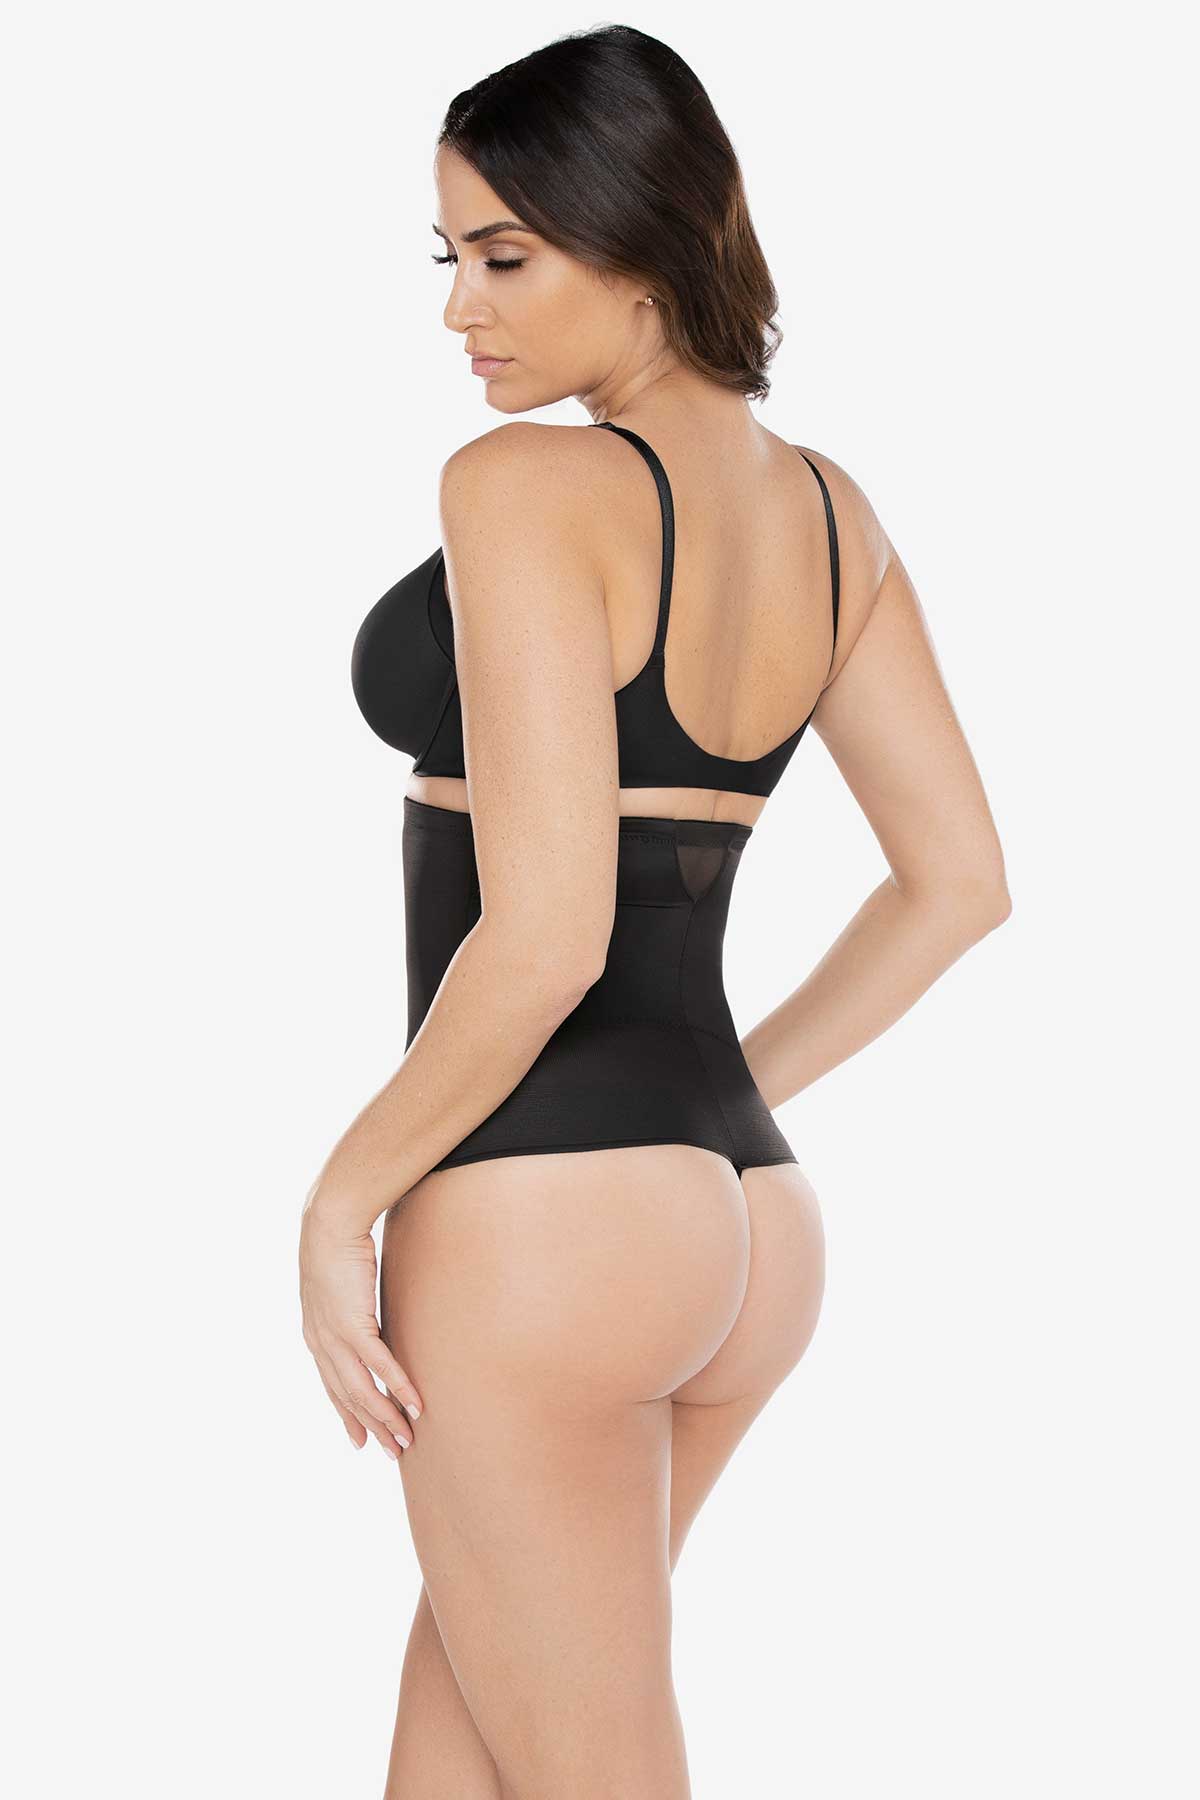 Wholesale high waist thong shaper For Effortless Curves And Style 